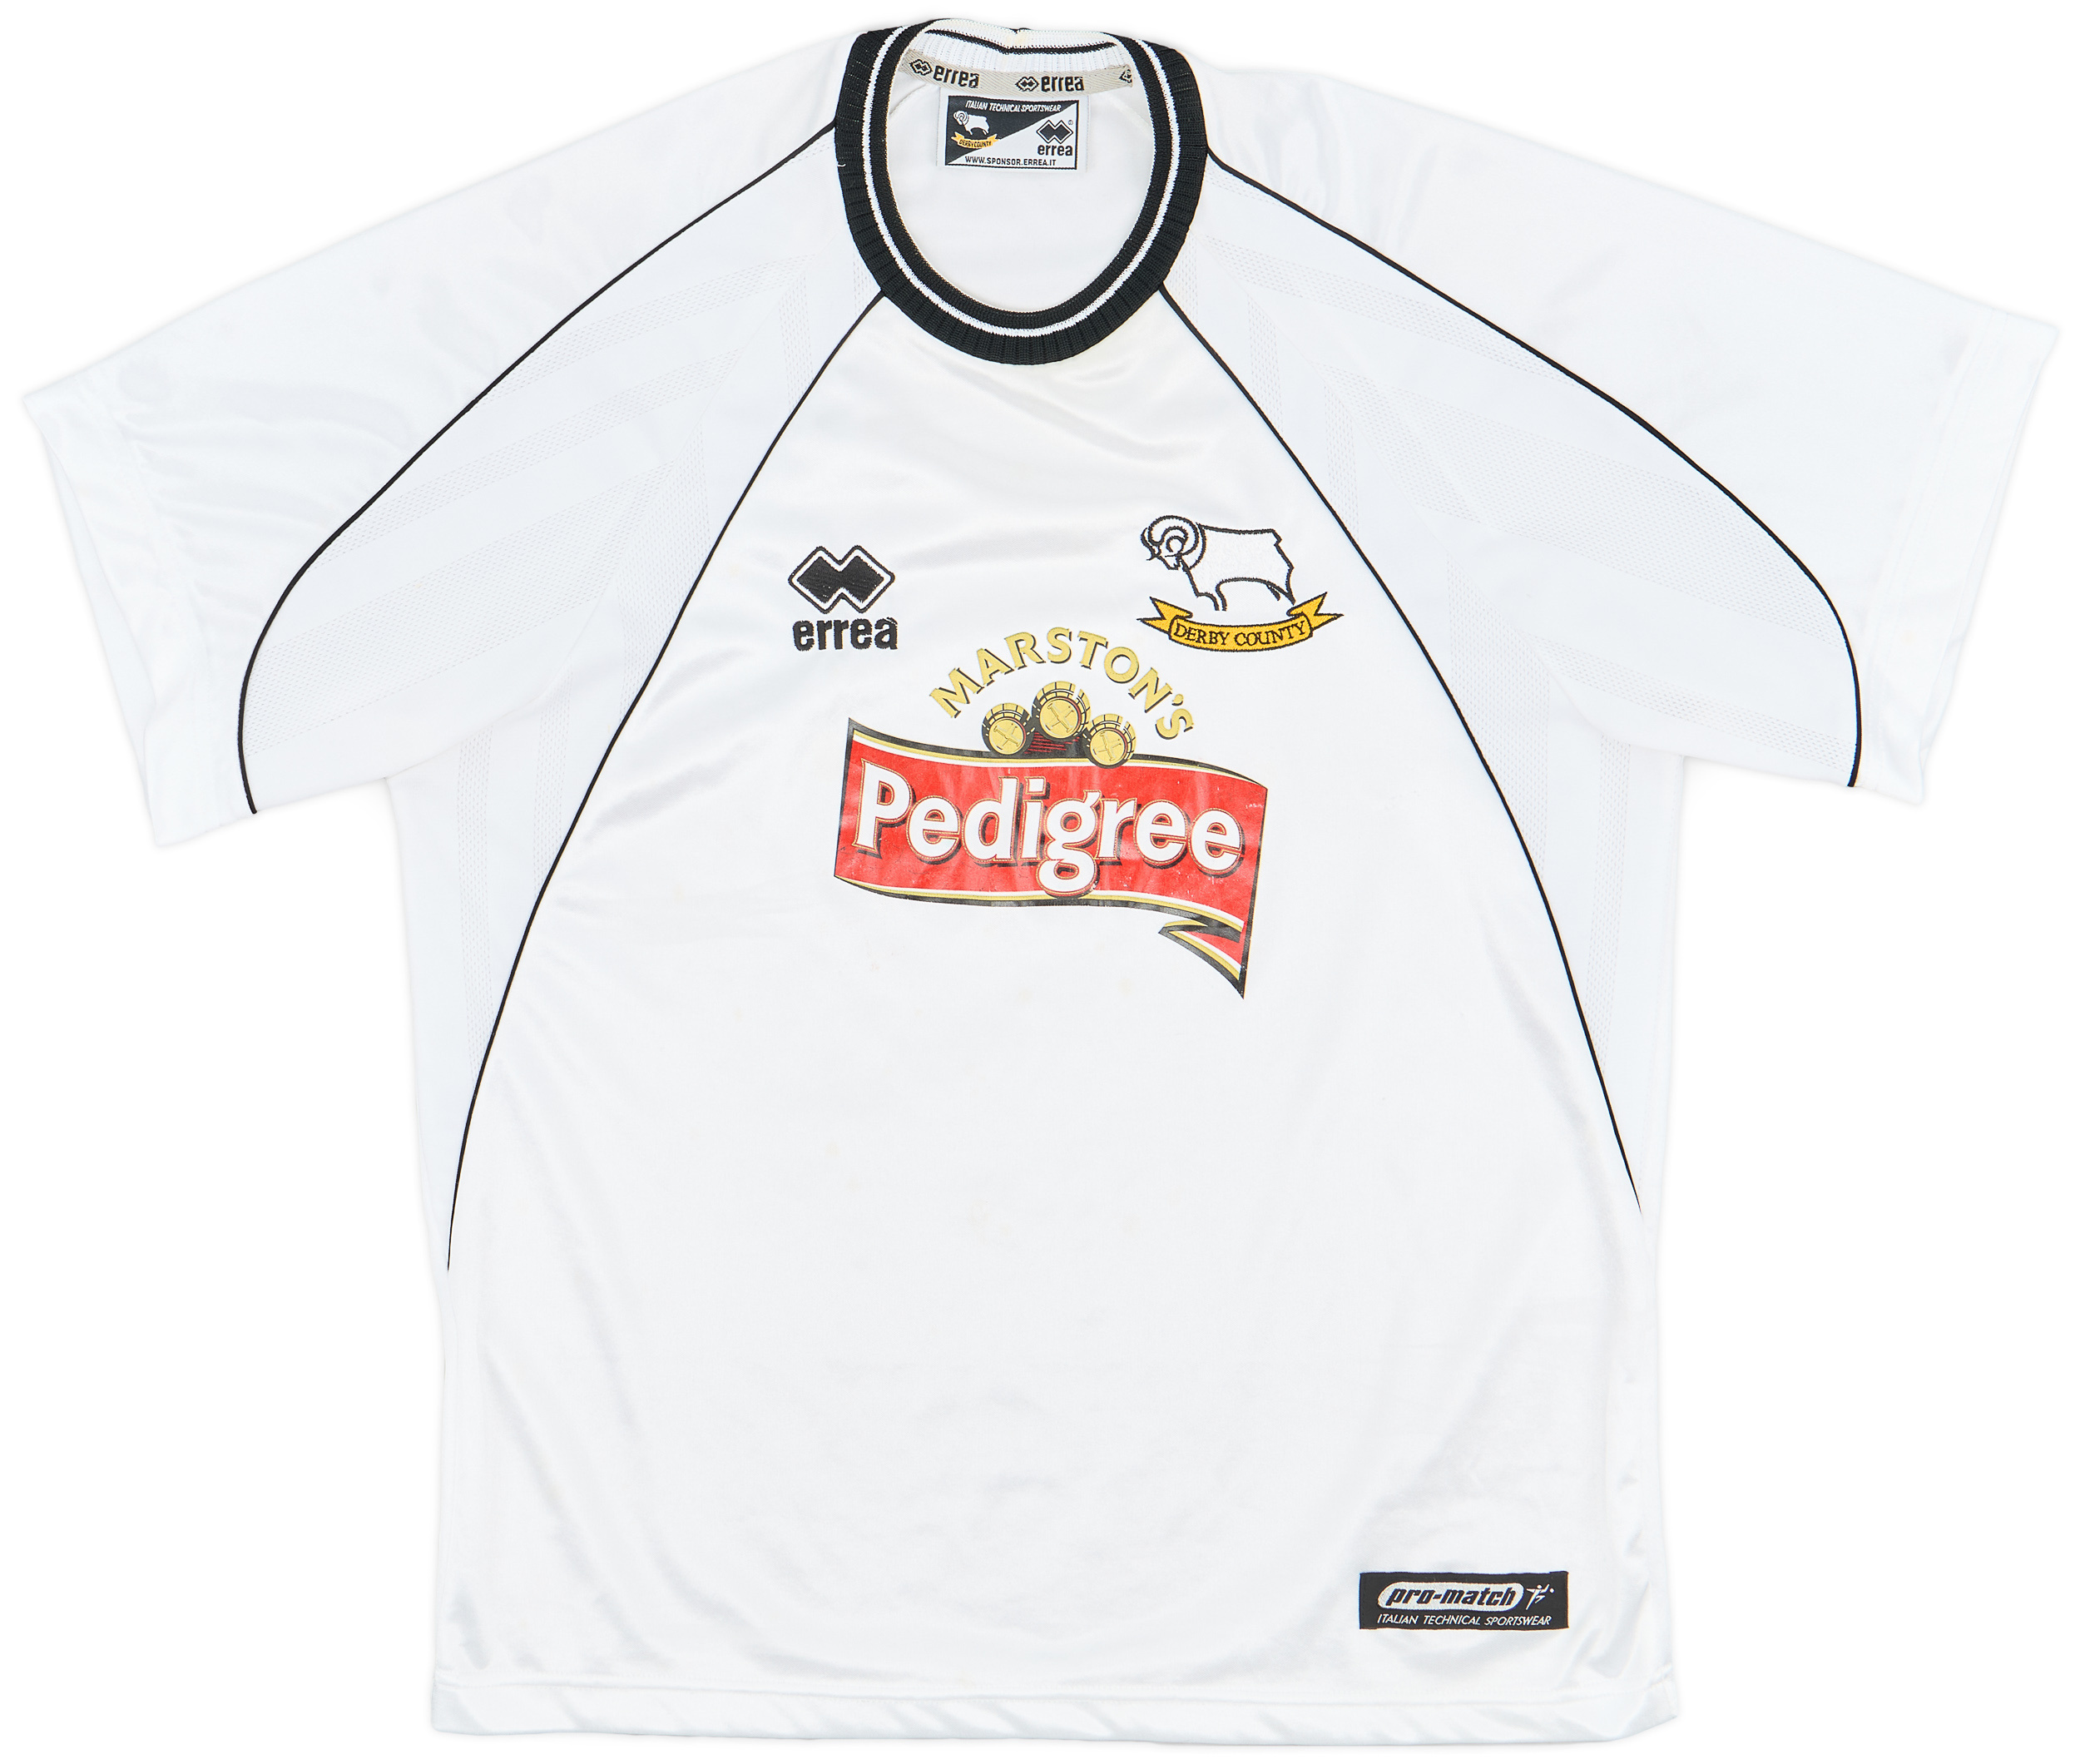 2001-02 Derby County Home Shirt - 7/10 - ()